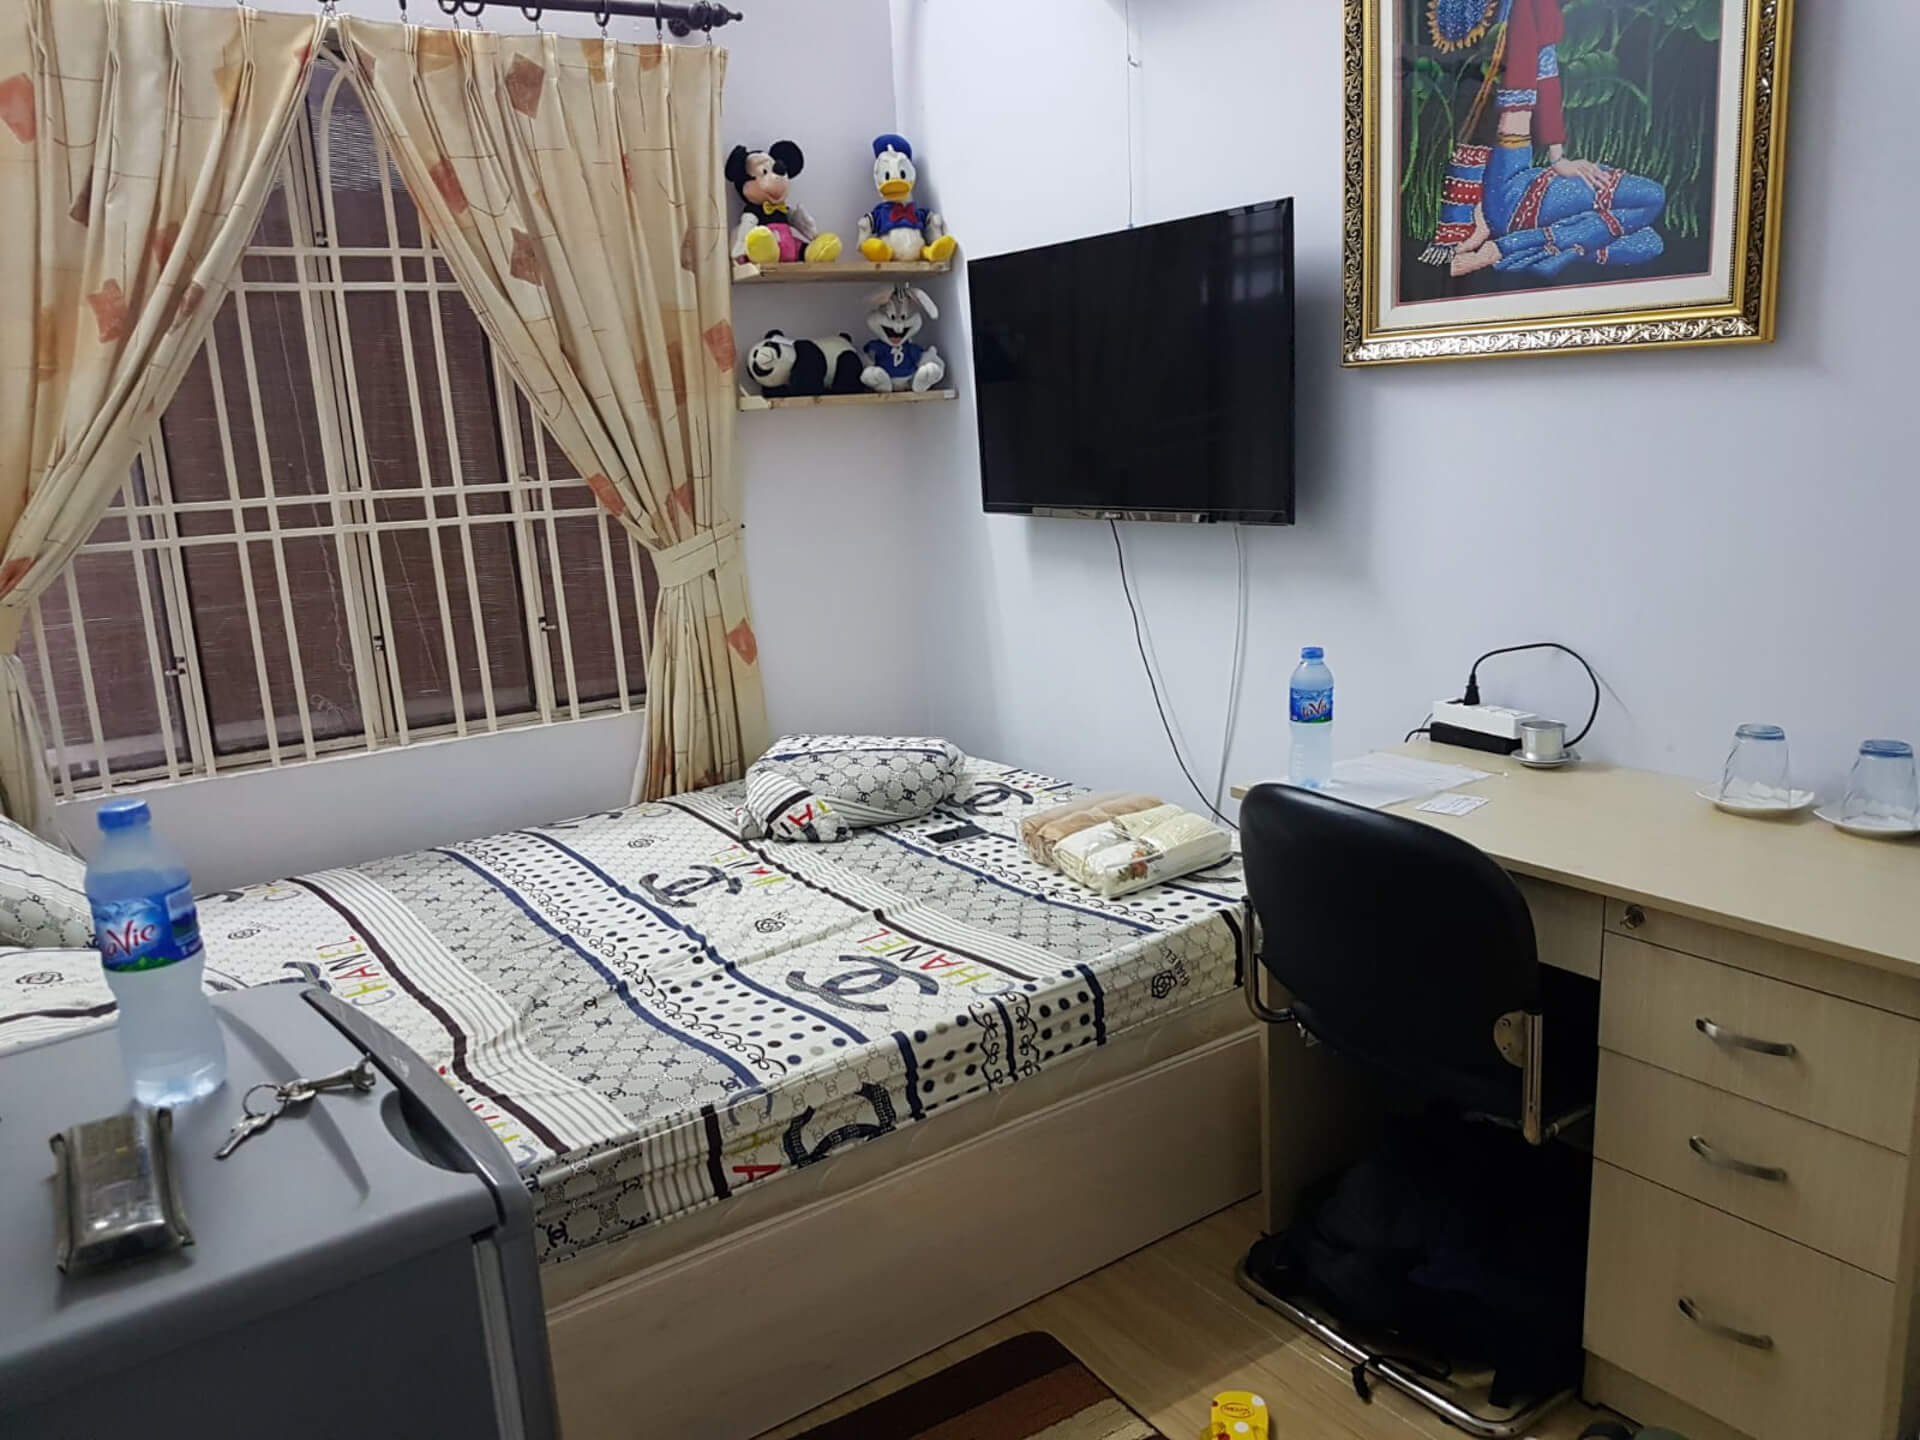 Picture of Thuy Huong Homestay in Ho Chi Minh Cith, Vietnam